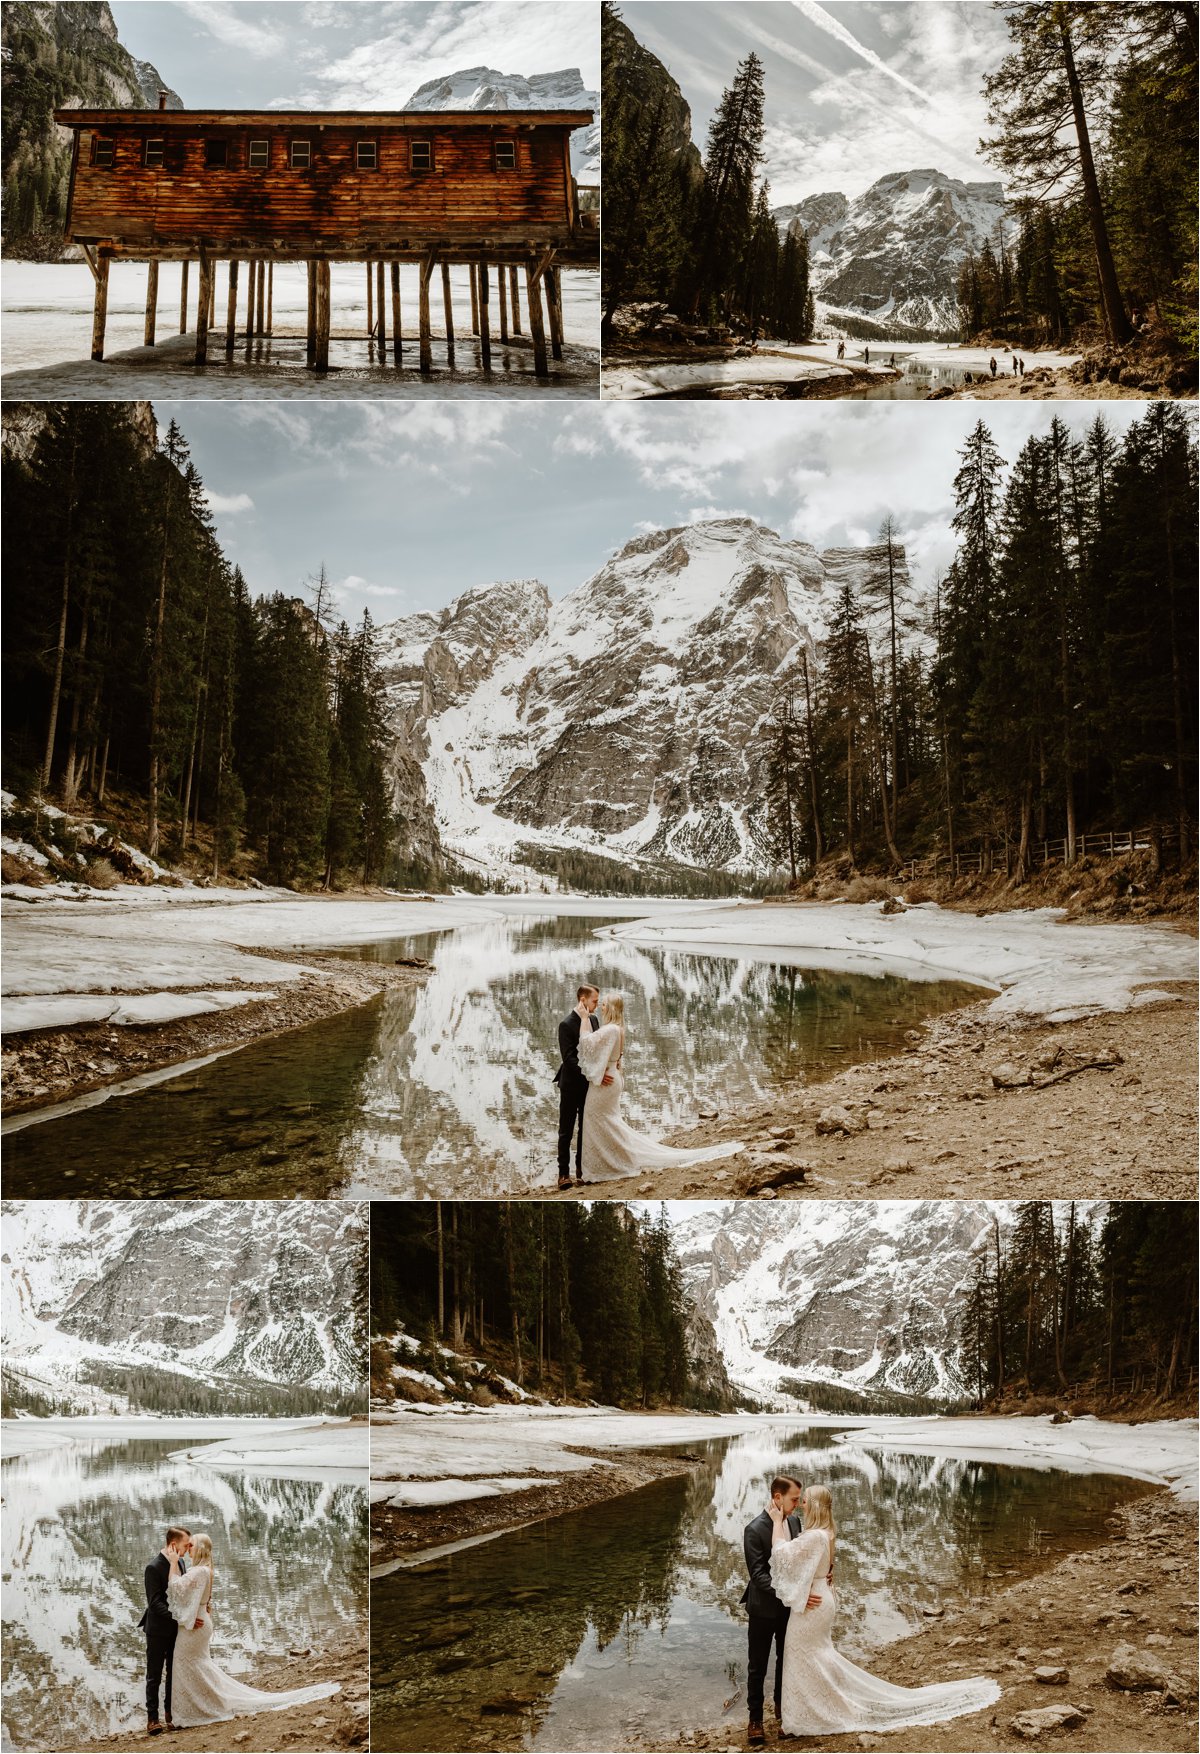 A small part of Lago di Braies lake in the Dolomites unfreezes after a long winter. Erika & Nathan enjoy the reflections of the mountains in the water on the day of their elopement in the Italian Alps. Photos by Wild Connections Photography - Alps & Dolomites Elopement Photographer